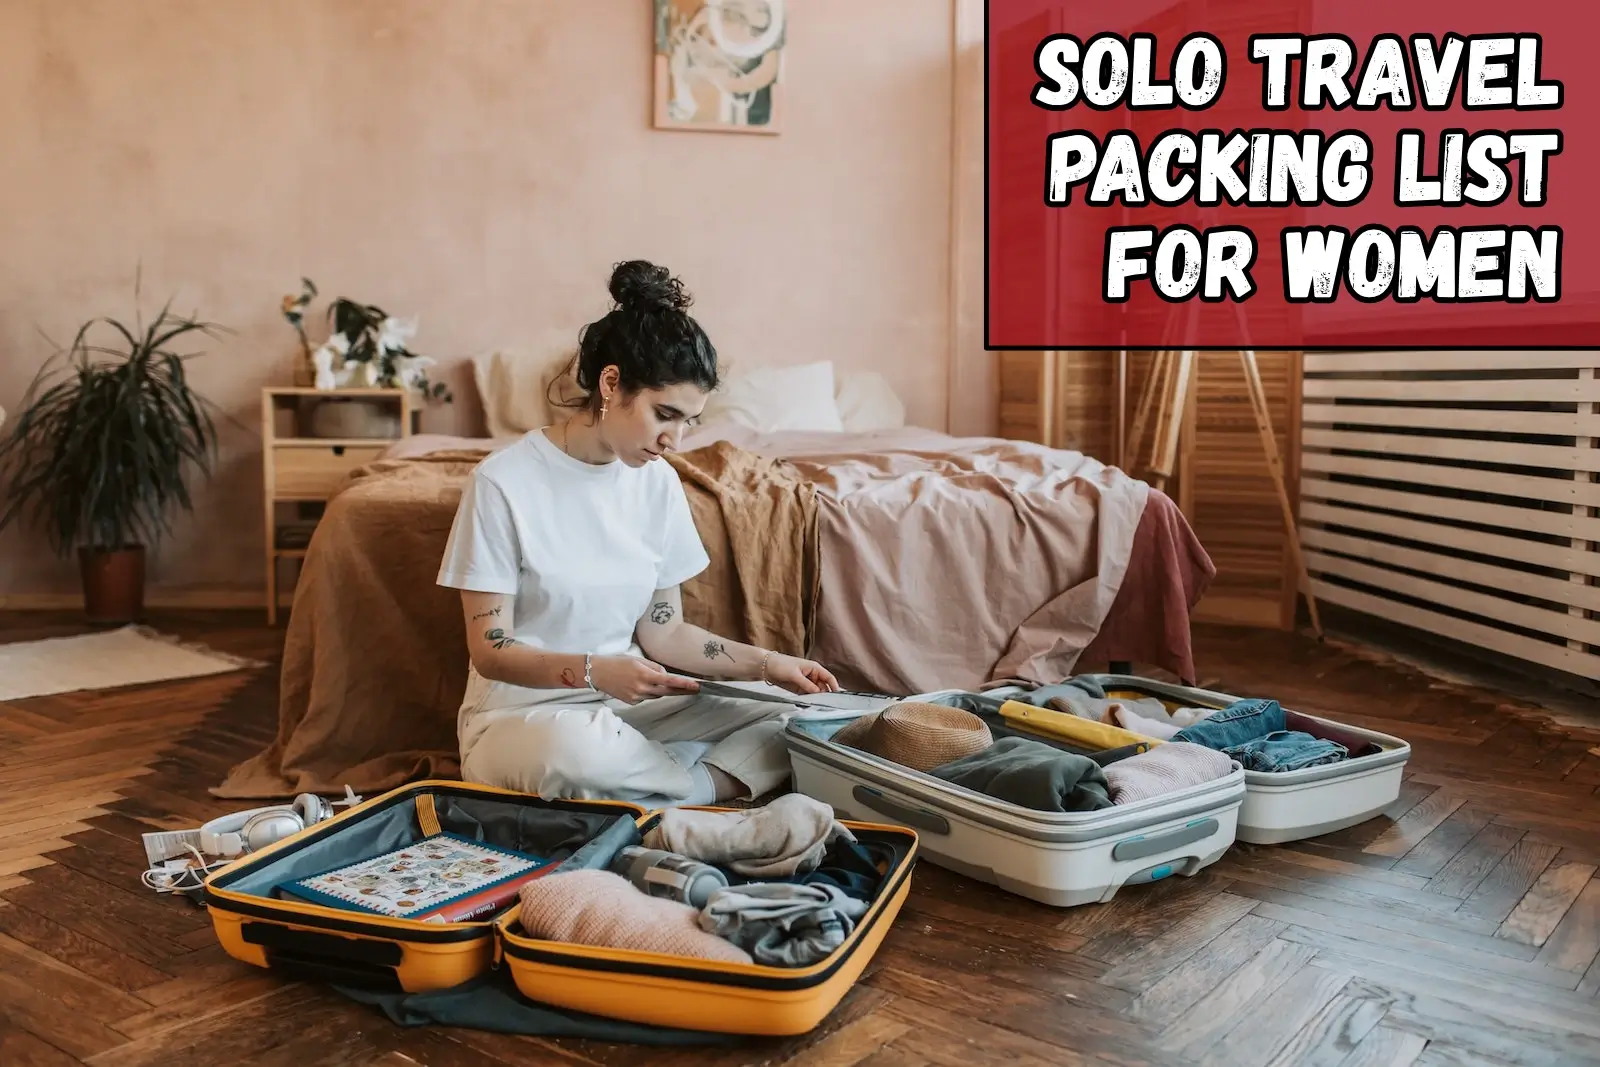 Solo Travel Packing List for Females (100 Crucial Items)